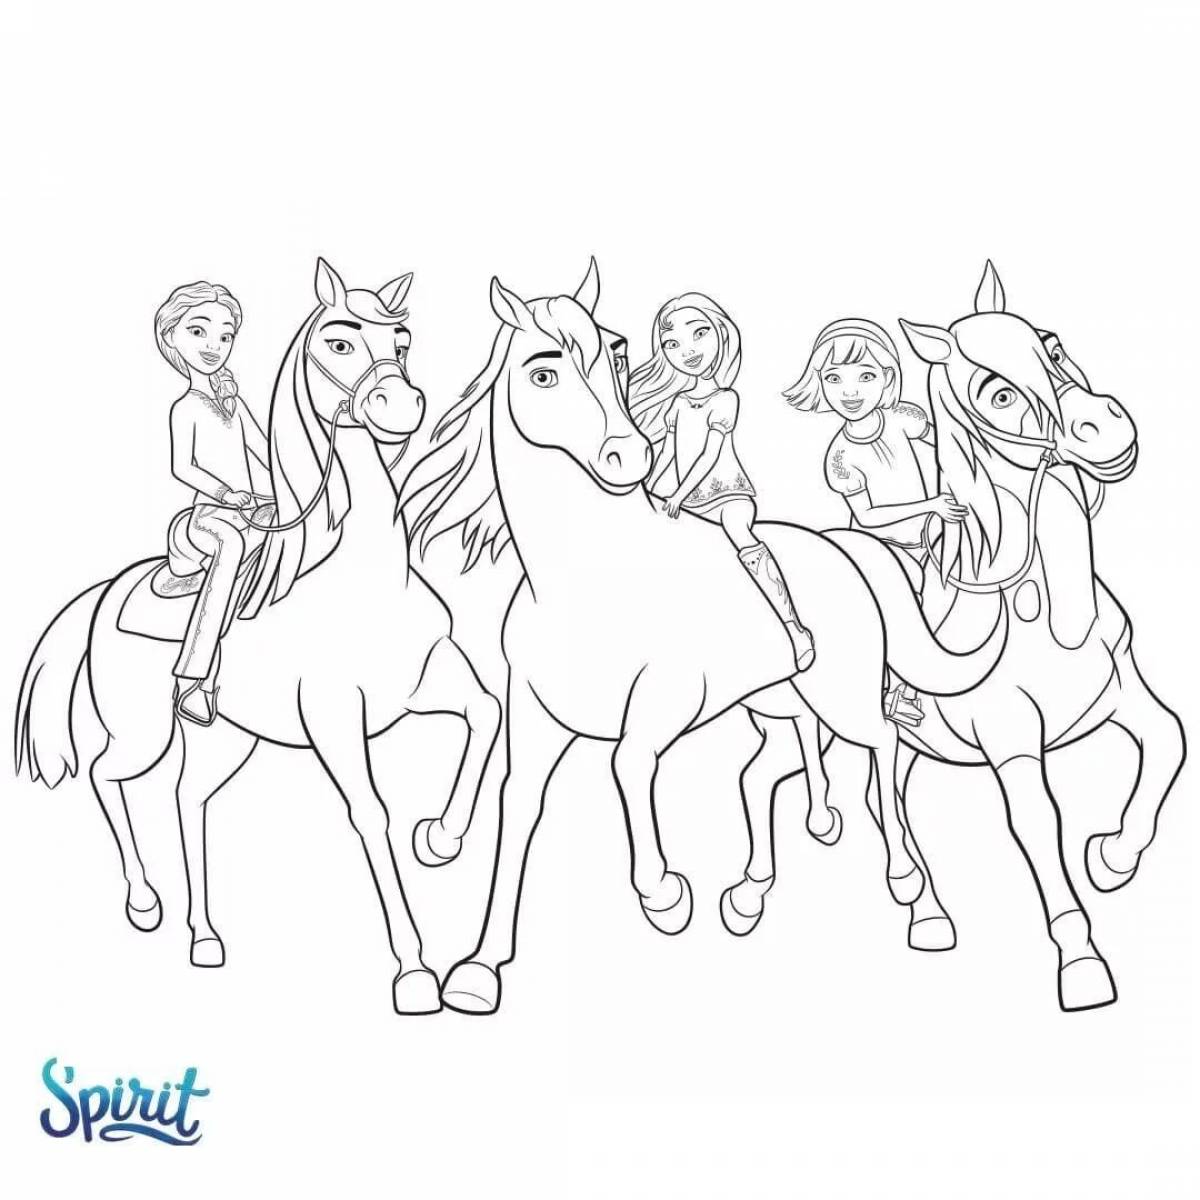 Inspirational Rebellious Spiritist coloring page